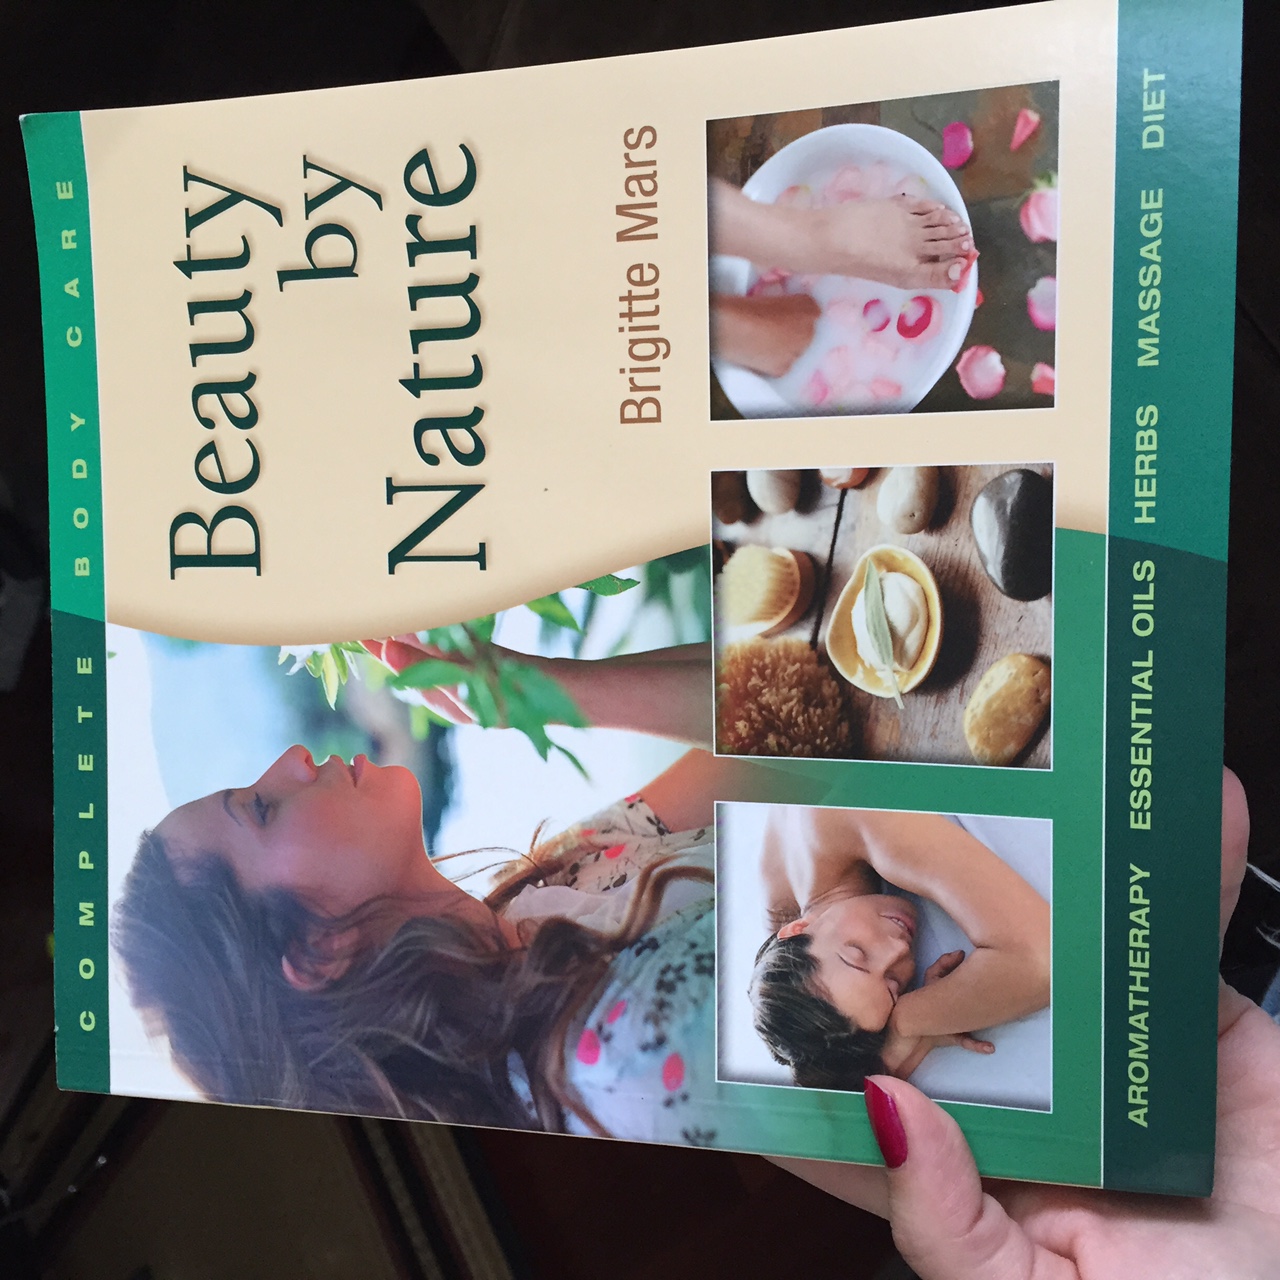 Beauty By Nature Book Review Vegan Beauty Review Vegan And